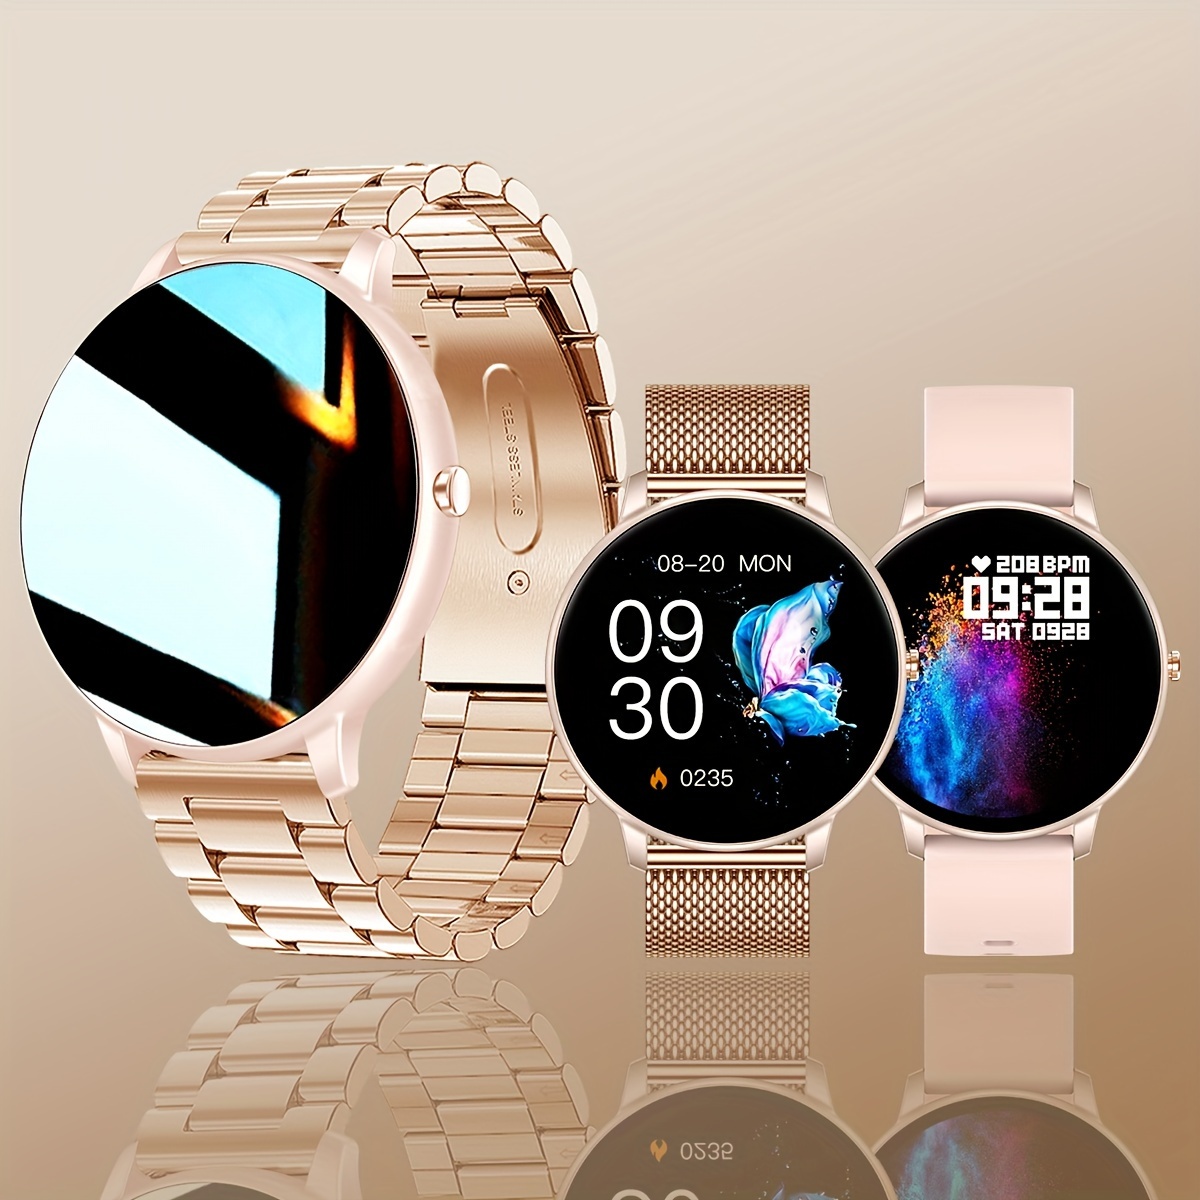 

New Fashion Women's Smart Watch 360*360 Hd Display Large Screen Wireless Phone Synchronous Wireless Connection For A Variety Of Sports Mode Smart Watch For Men And Women